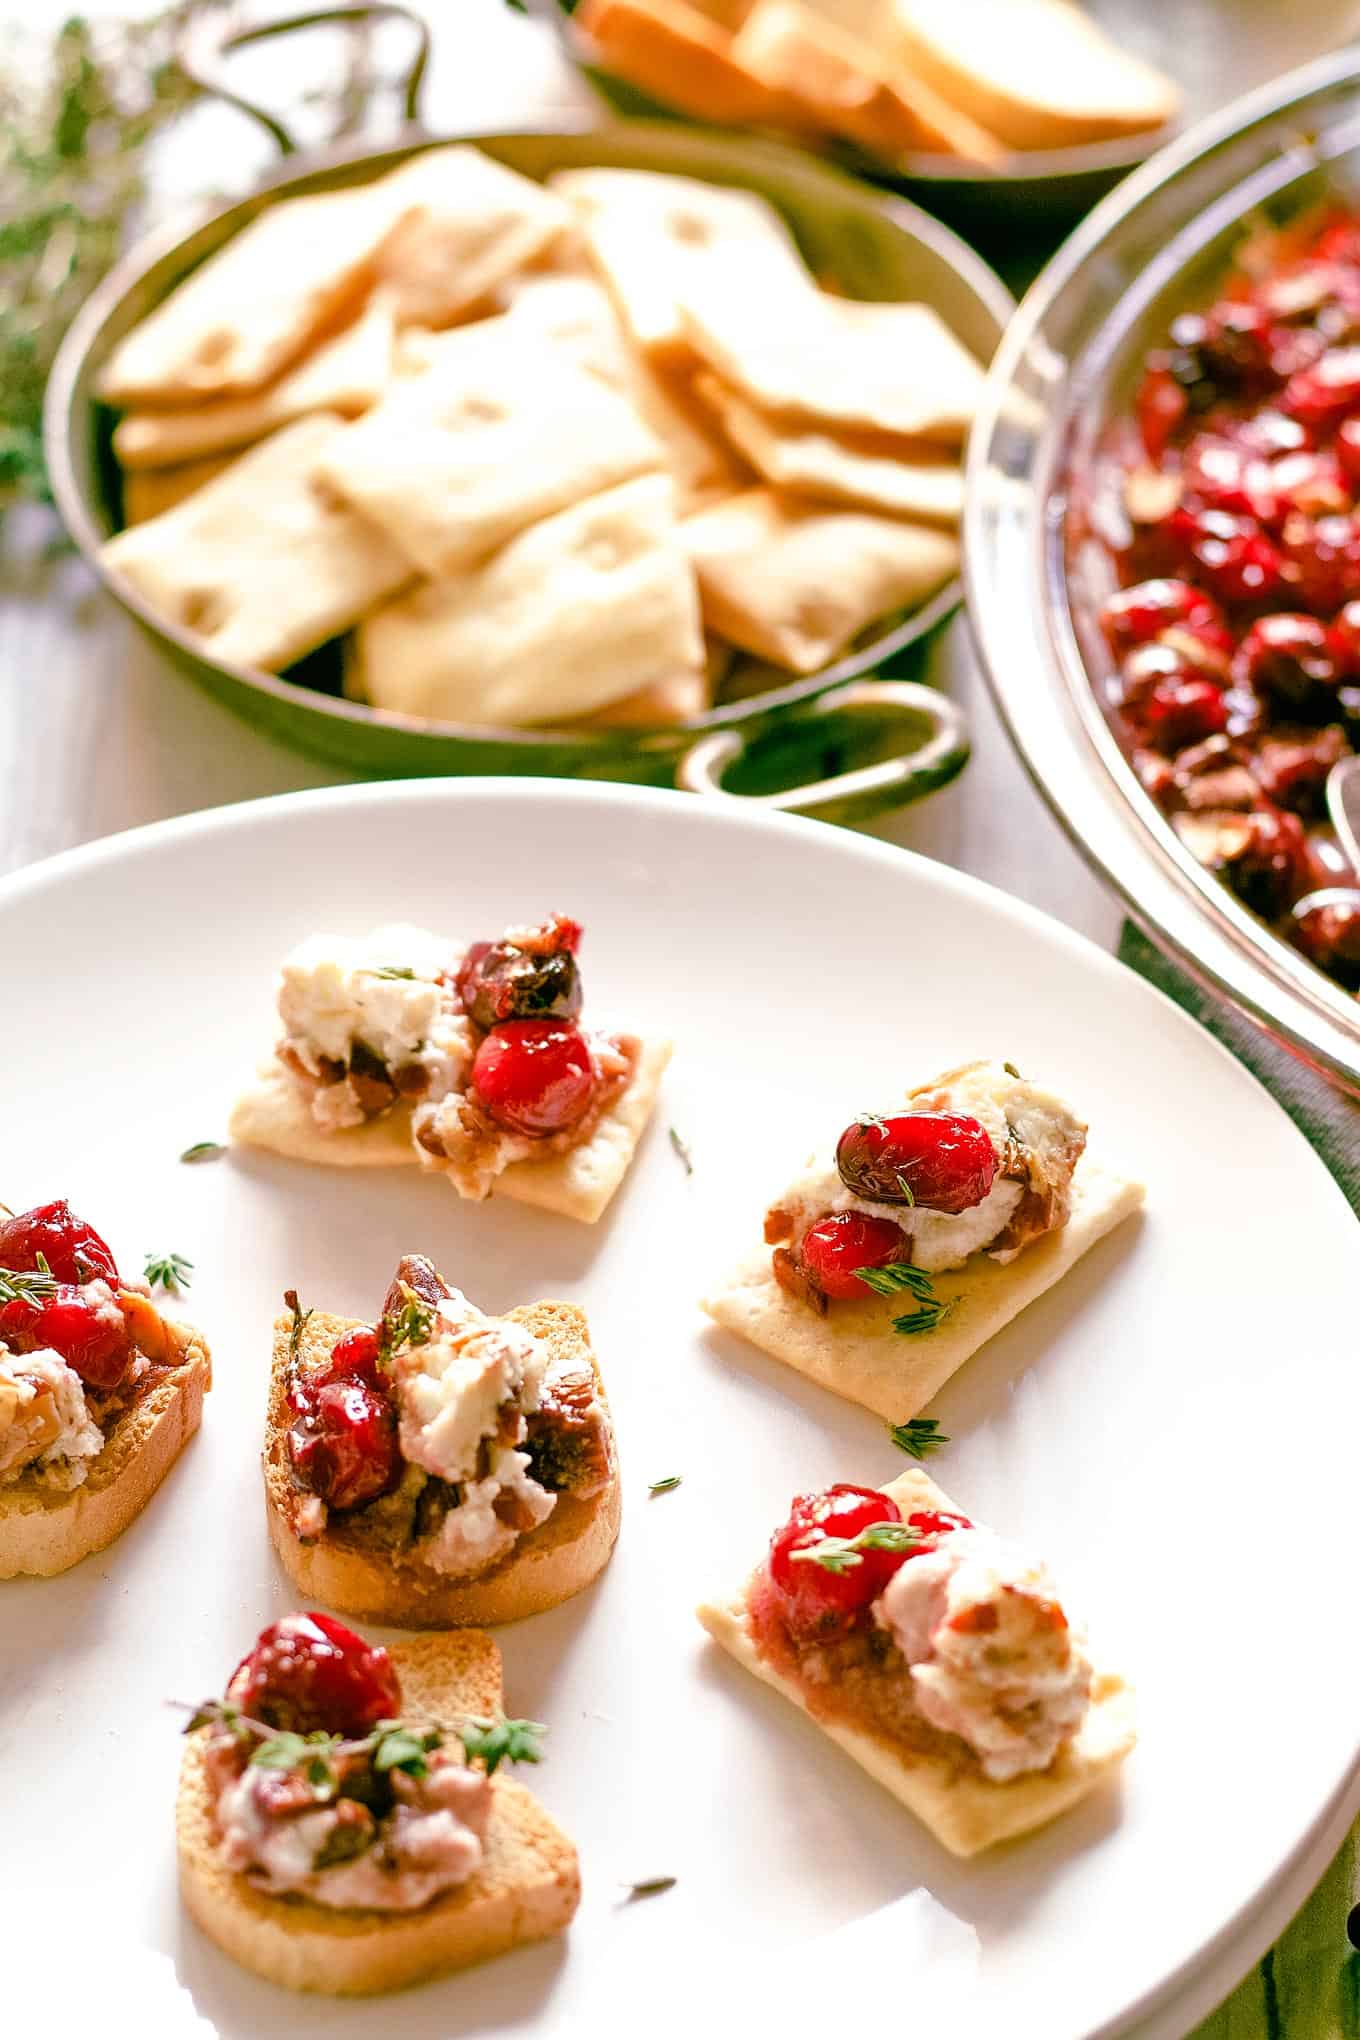 Baked Goat Cheese Cranberry Appetizer - Fancy but Easy!